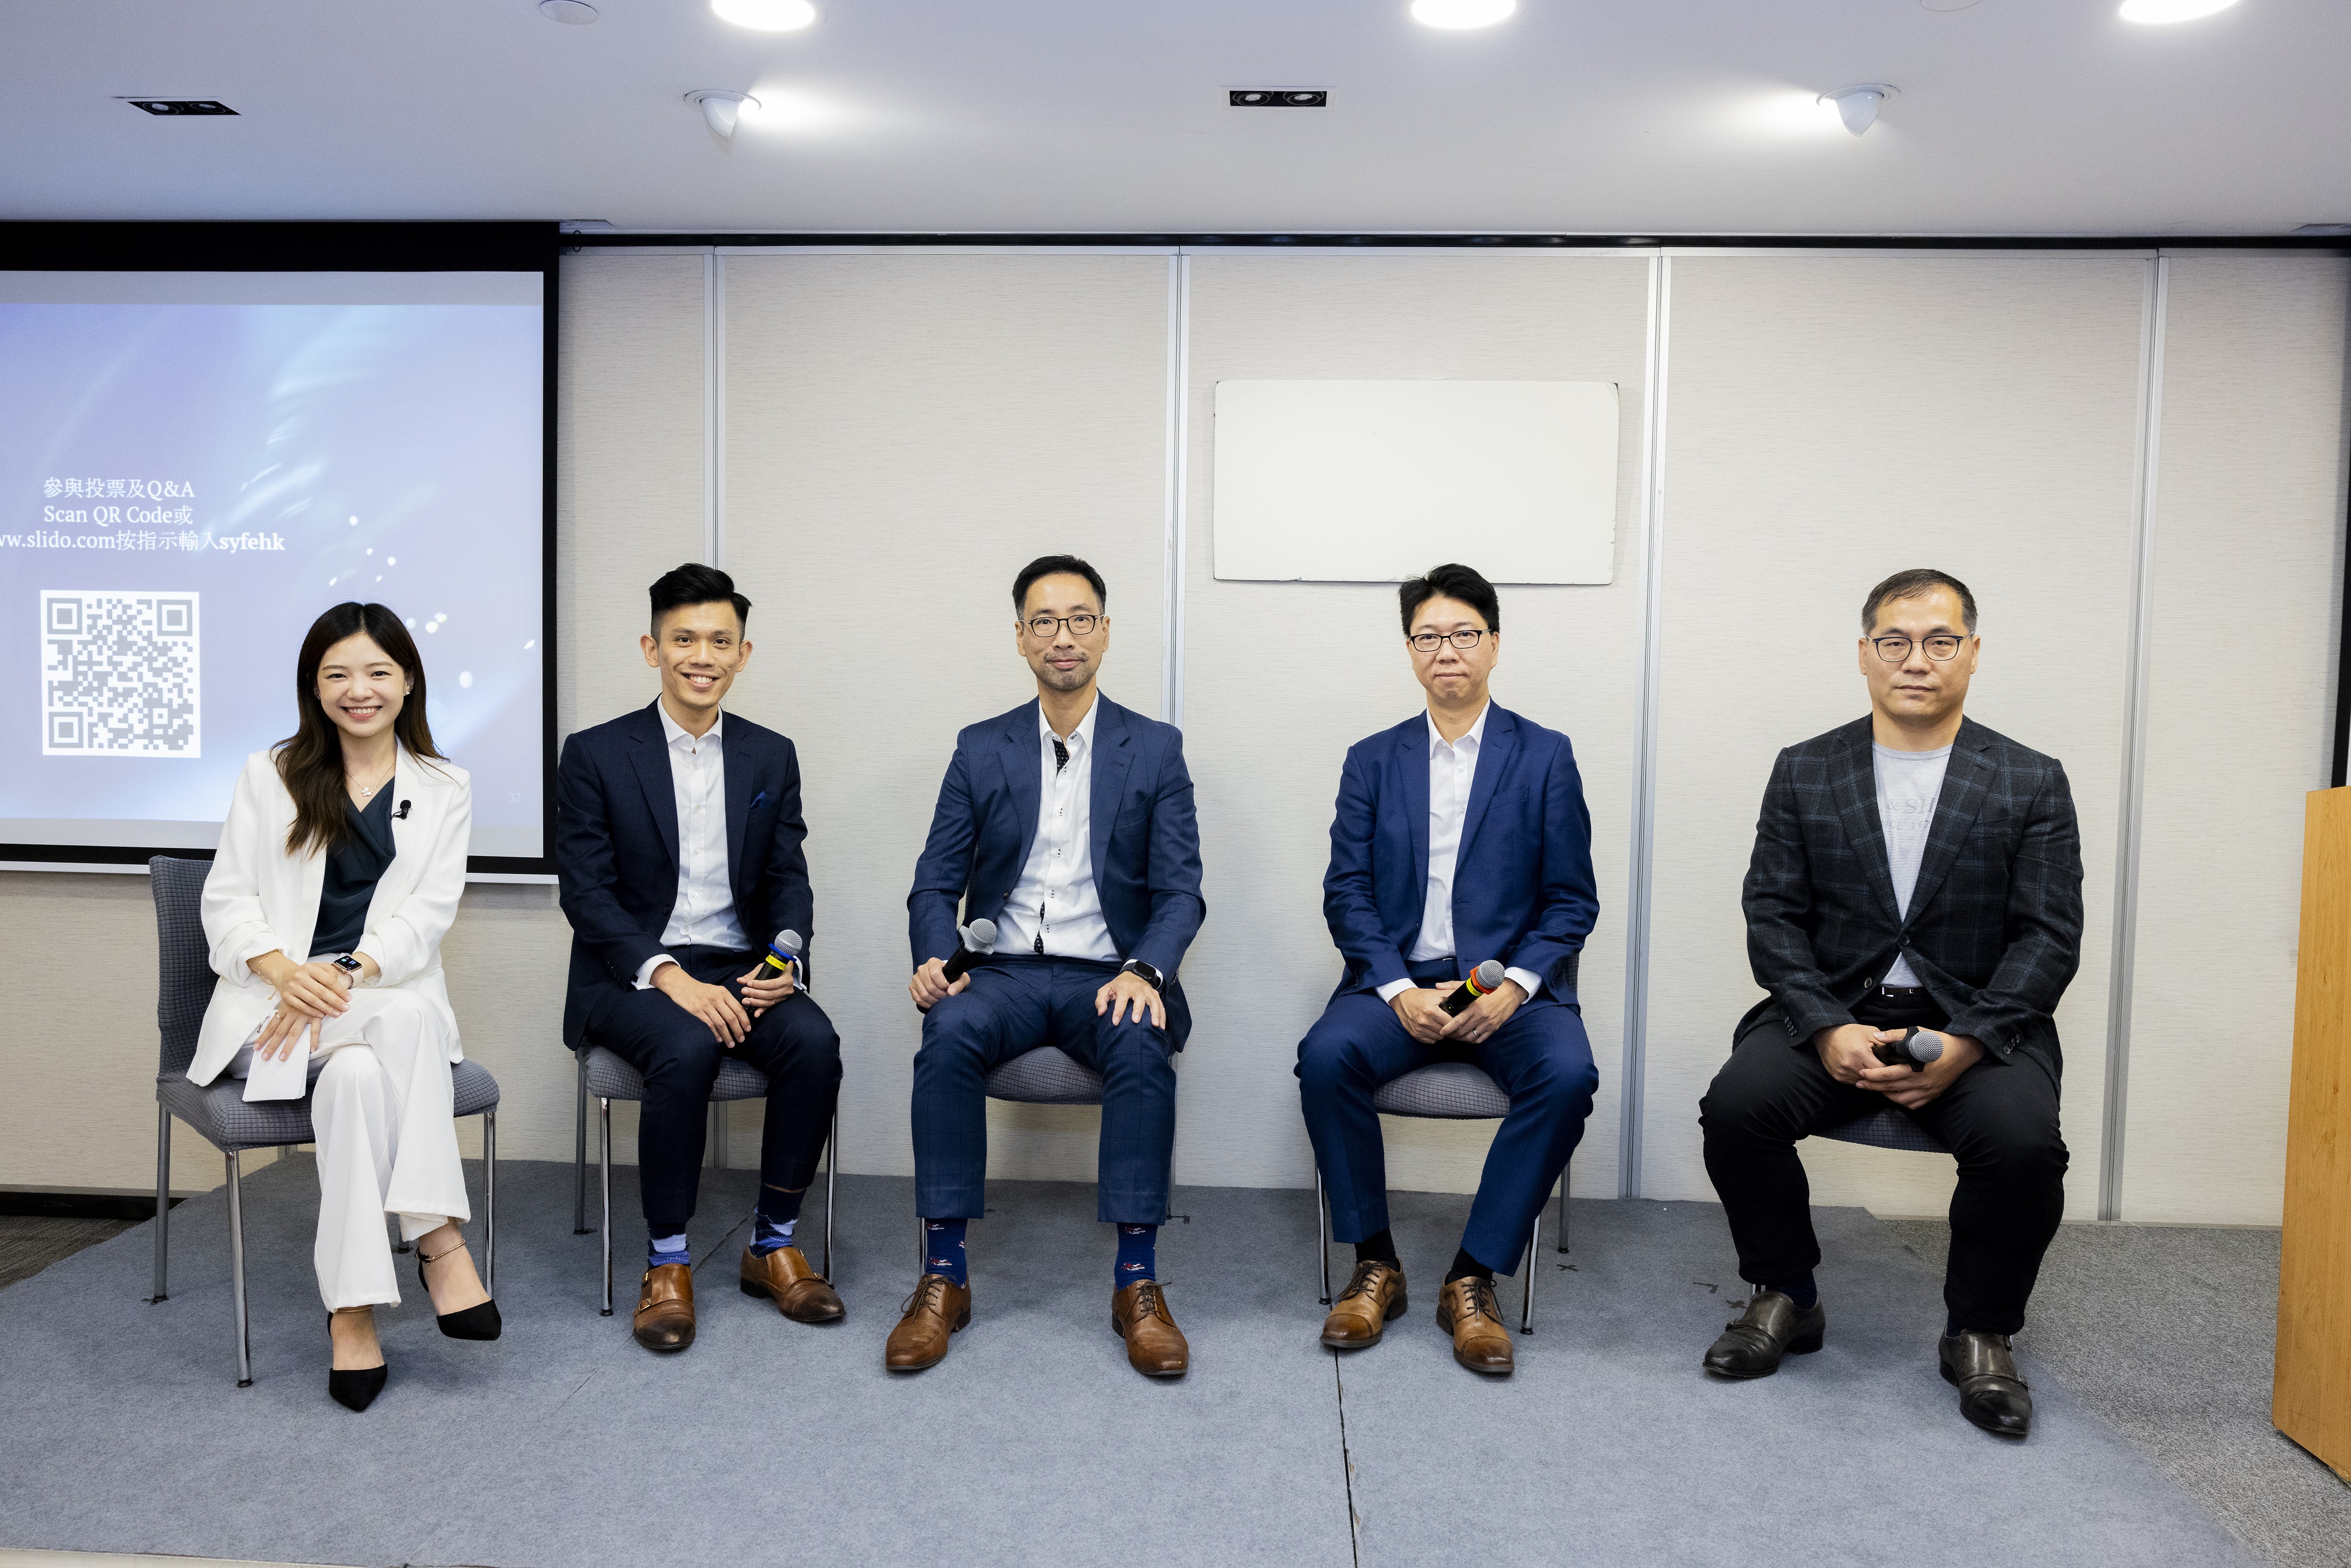 Syfe organized a seminar on 8 August to officially launch Syfe Income+ in Hong Kong, discussing perspectives on fixed income investment opportunities and how Syfe Income+ can help investors grow their passive income amid ongoing market uncertainty. The Syfe team was joined by elite industry speakers including Neil Tan, Chairman of the FinTech Association of Hong Kong; Wilson Au, Head of Market Strategists, Wholesale Business, HSBC Asset Management; Simon Wong, Co-Head of Hong Kong and Head of Retail Sales, Greater China, Franklin Templeton Investments (Asia) Limited, Hong Kong; and Oscar Choi, Founder and CIO, OP Capital.